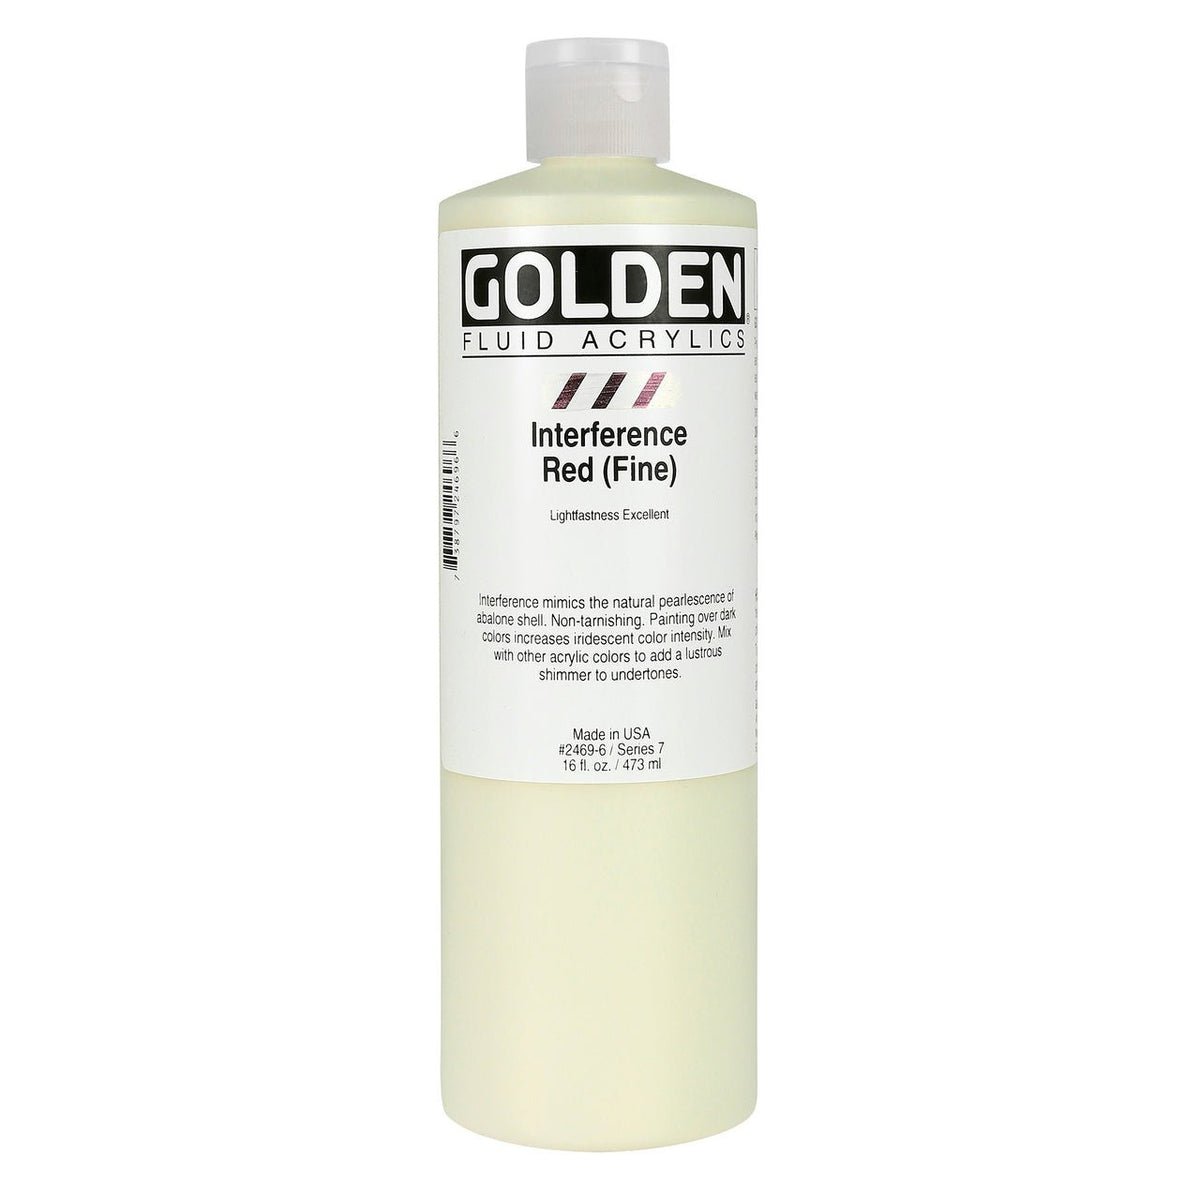 Golden Fluid Acrylic Interference Red (fine) 16 oz - merriartist.com